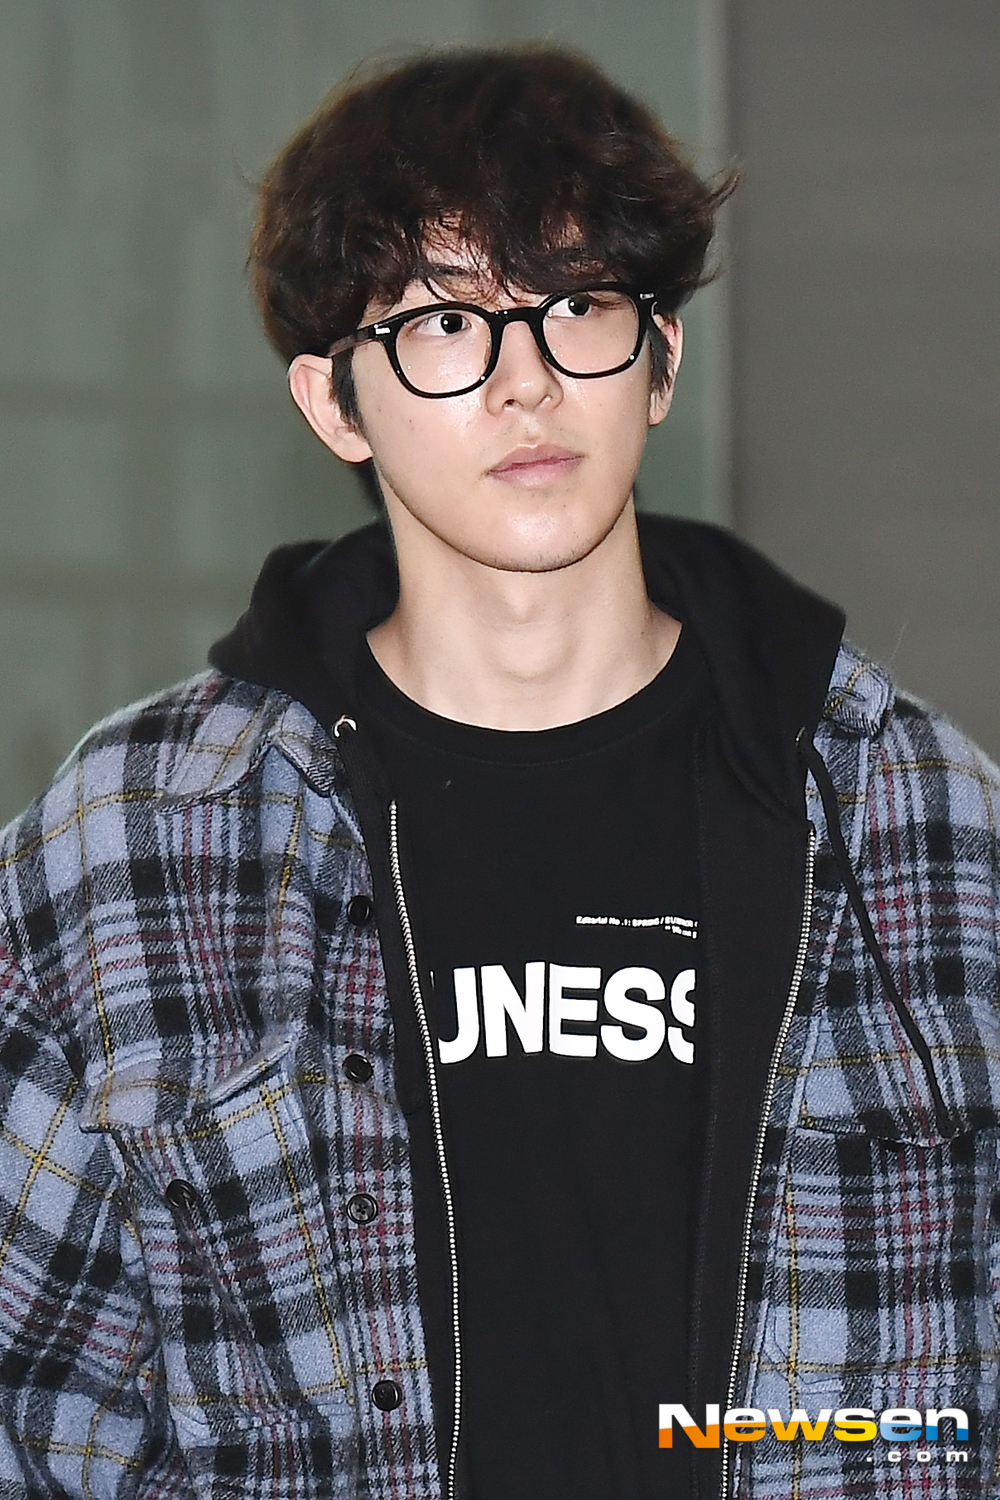 Actor Nam Joo-hyuk left for Bangkok, Thailand, on the morning of March 1st, to attend the 2019 Nam Joo-hyuk fan meeting Bangkok (2019 NAM JOO HYUK FANMEETING IN BANGKOK) schedule through Incheon International Airport in Unseo-dong, Jung-gu, Incheon.Actor Nam Joo-hyuk is leaving for Bangkok, Thailand.exponential earthquake